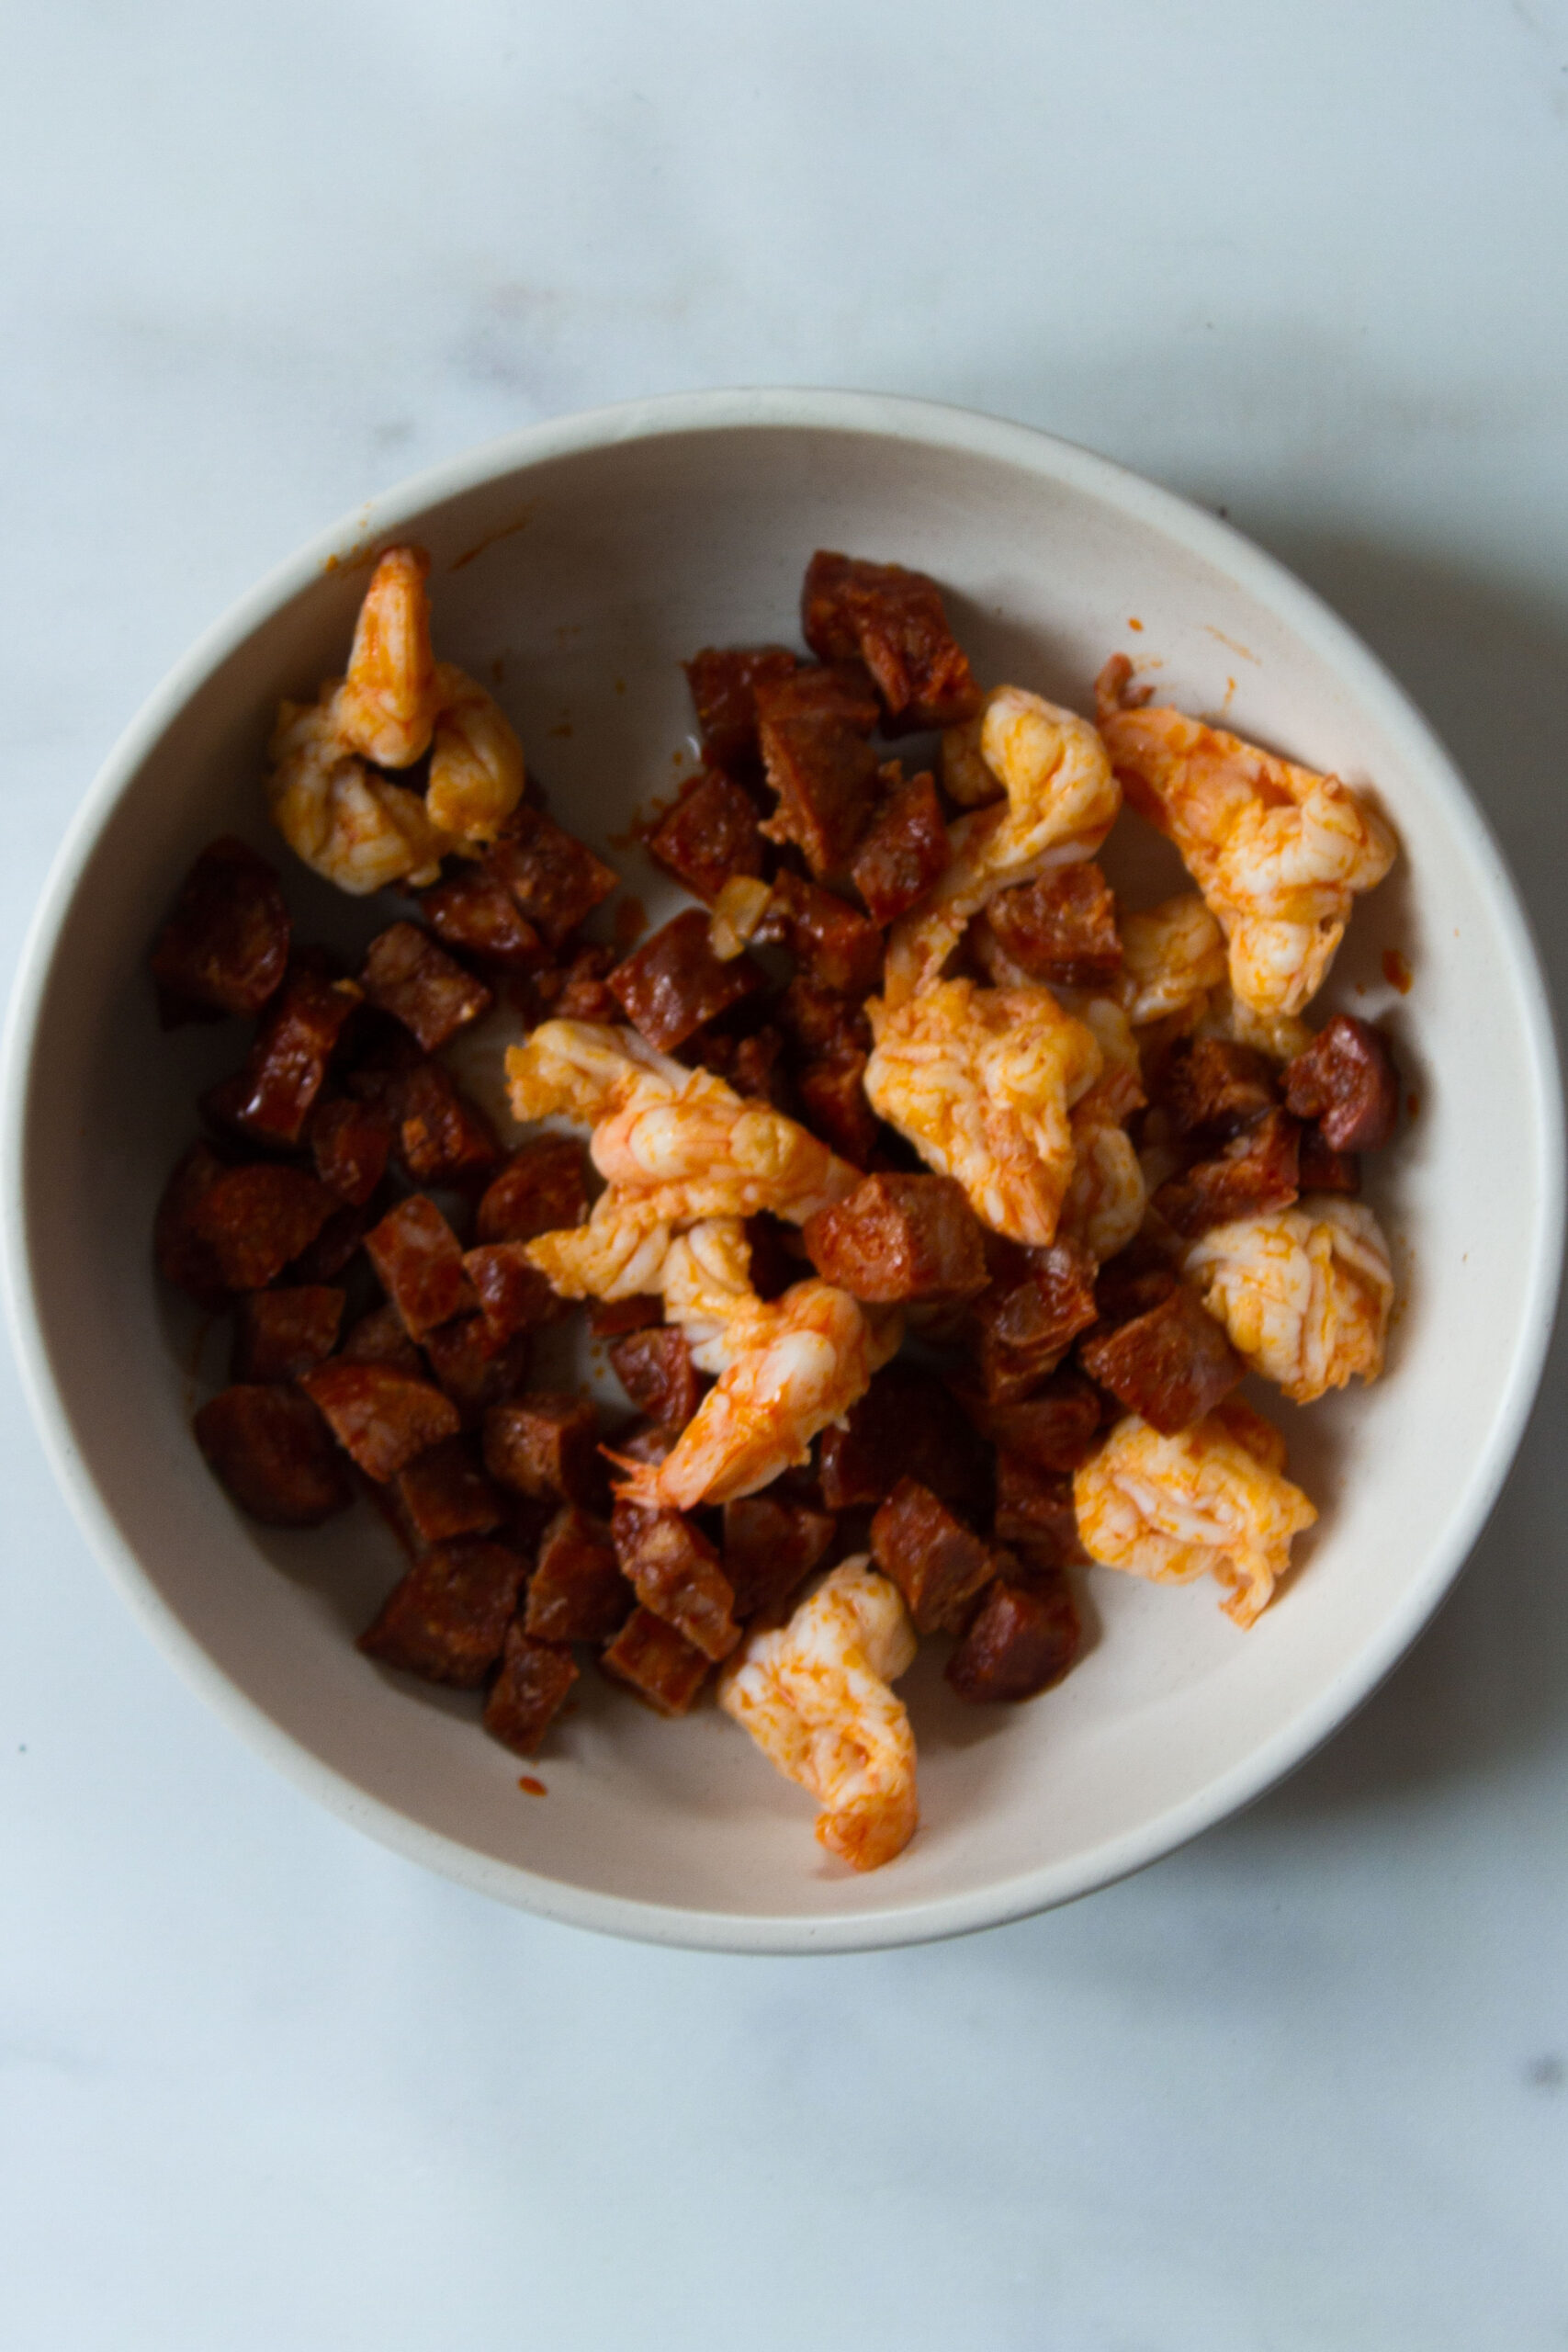 Thr cooked chorizo and prawns set aside in a white bowl on a pale blue background.